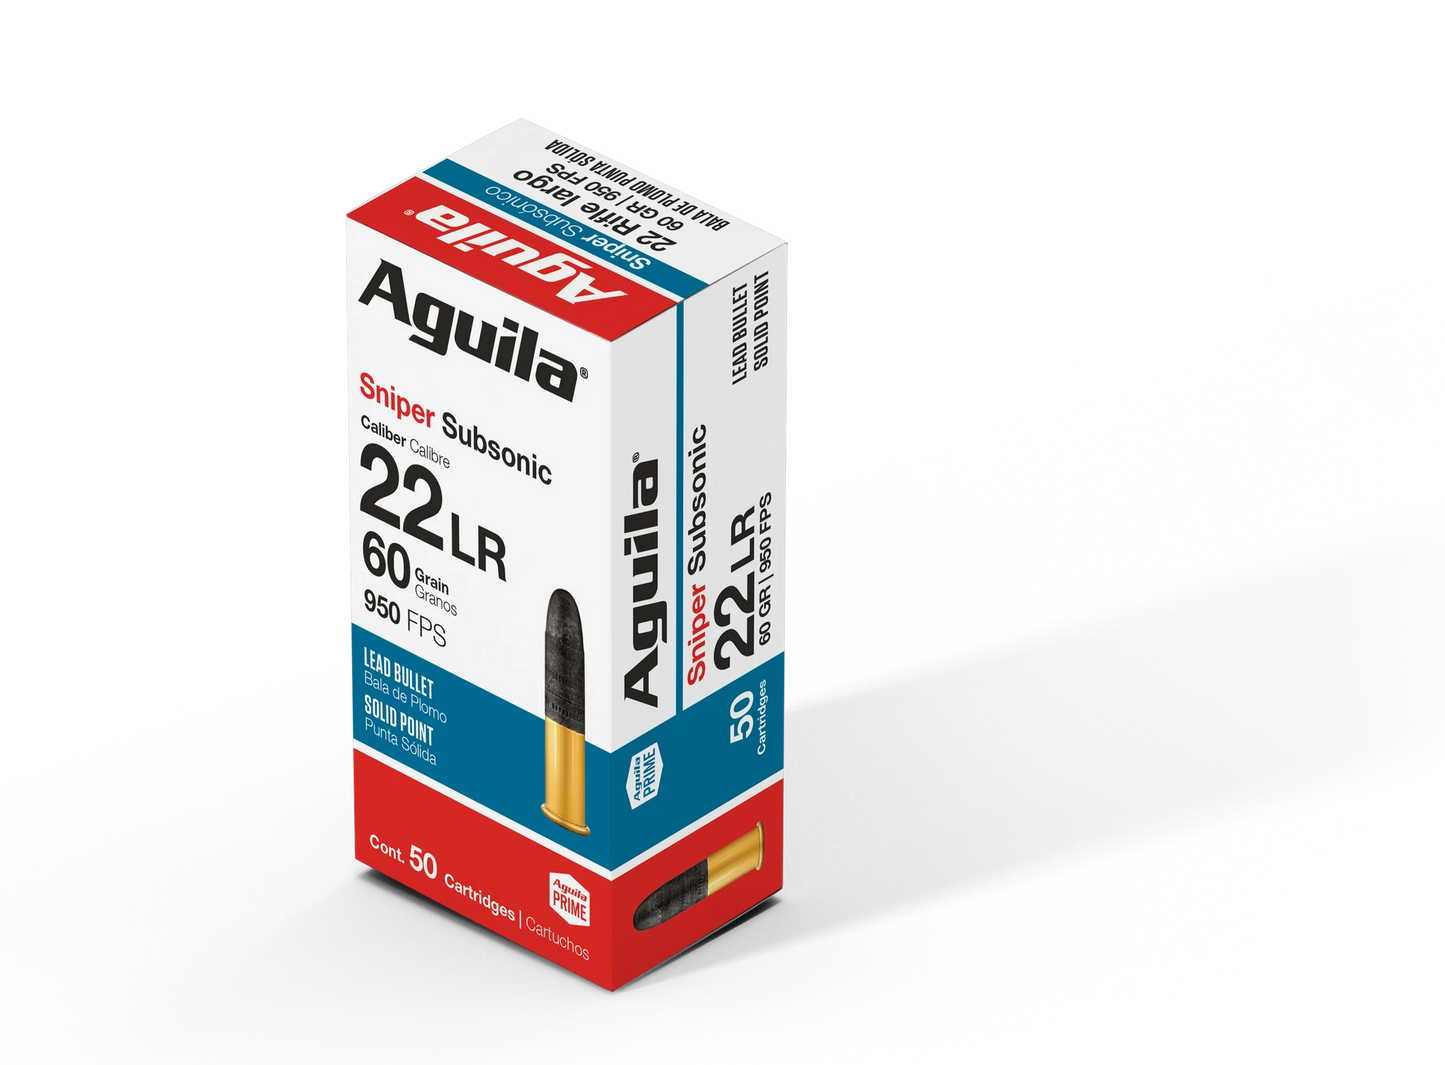 Aguila Sniper Subsonic 60gr 950fps